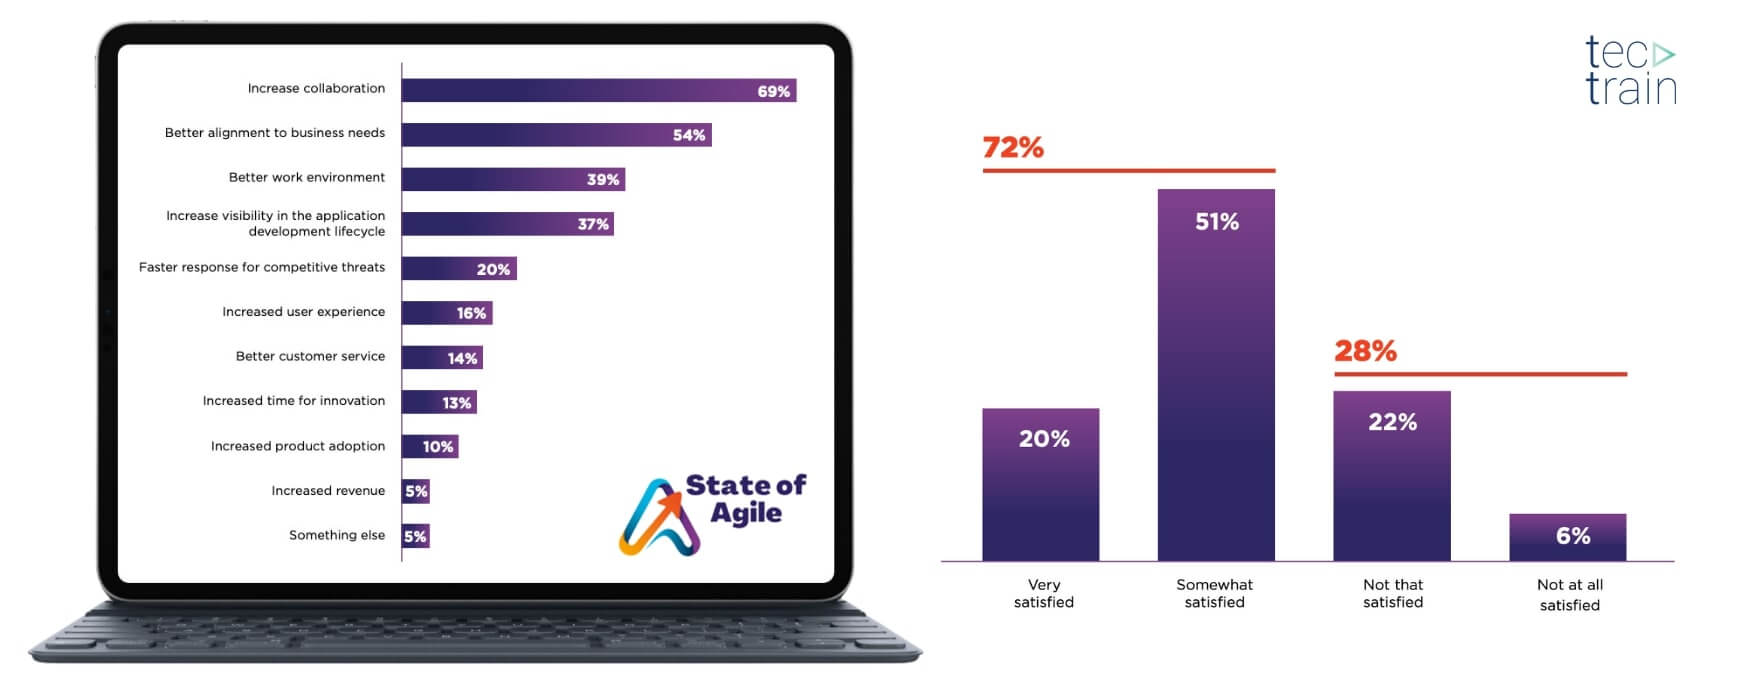 The 16th Agile Status Report gathered insights from over 3,000 people in the Agile community in 2022, revealing the top factors that contribute to satisfaction with Agile practices. 